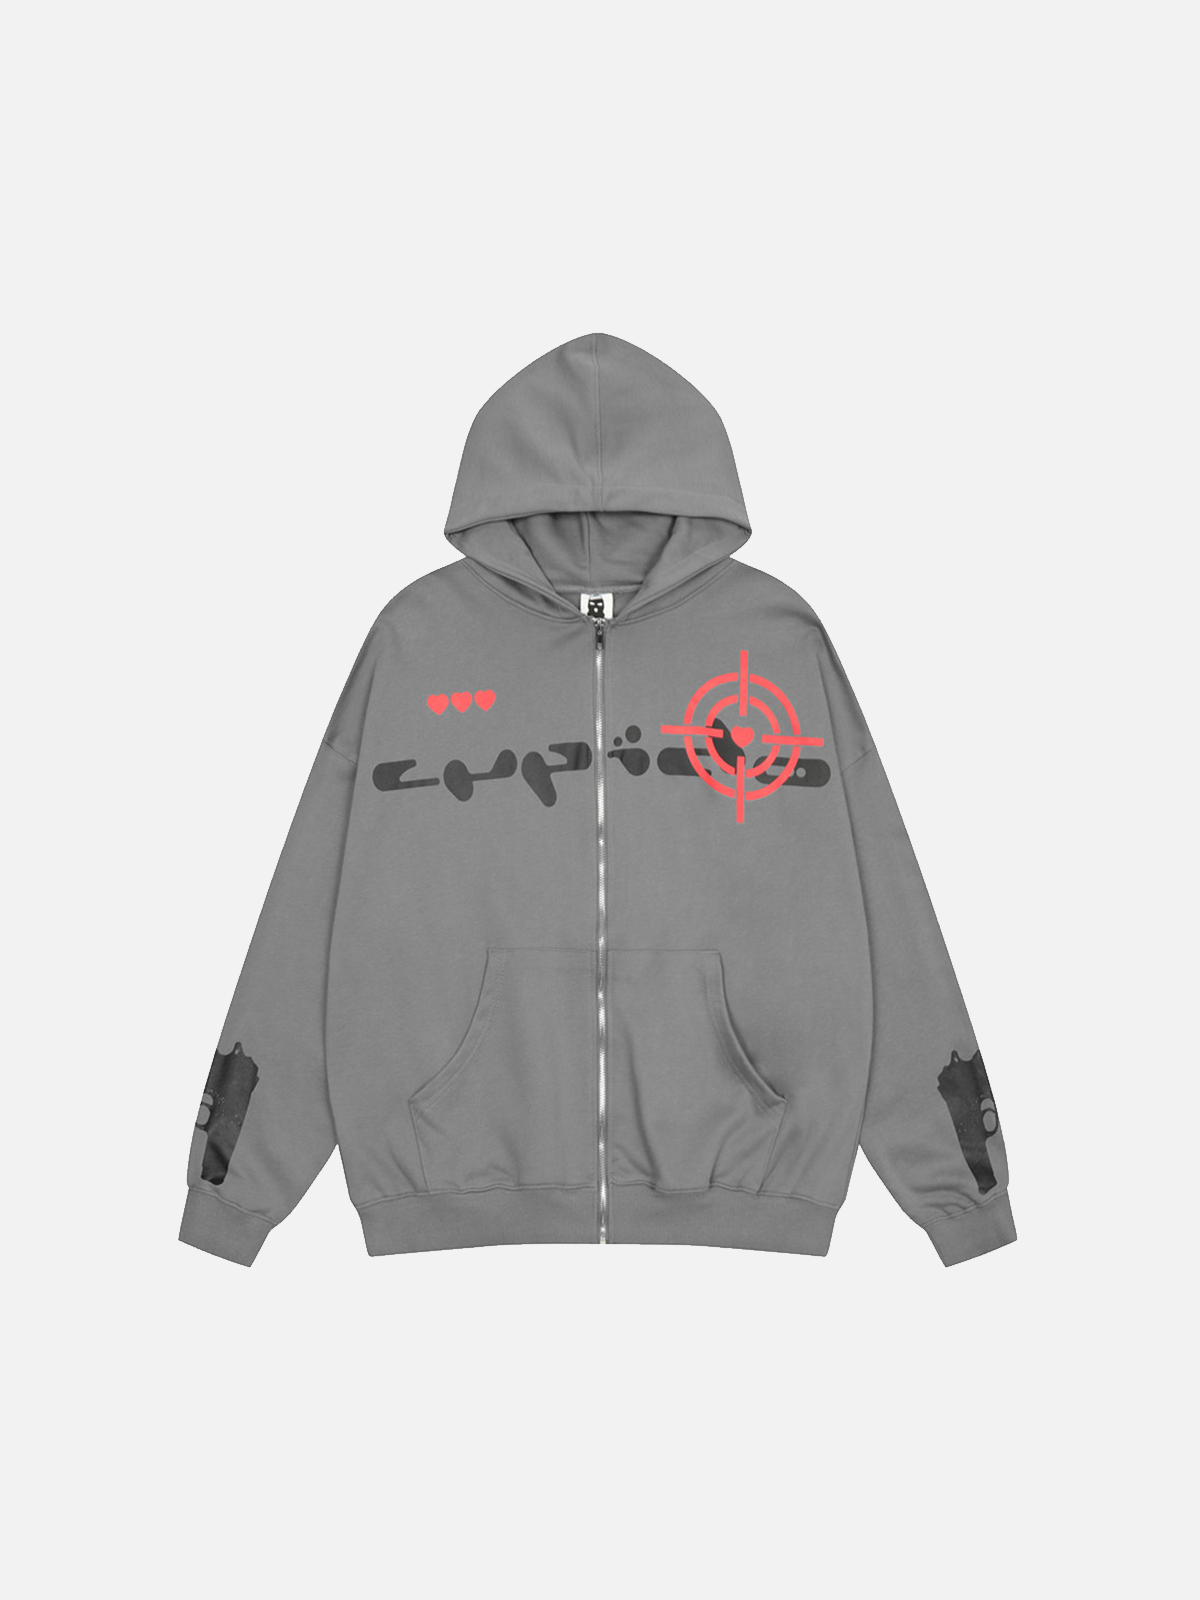 Faire Echo "Aiming At Heart" Print Zip Up Hoodie